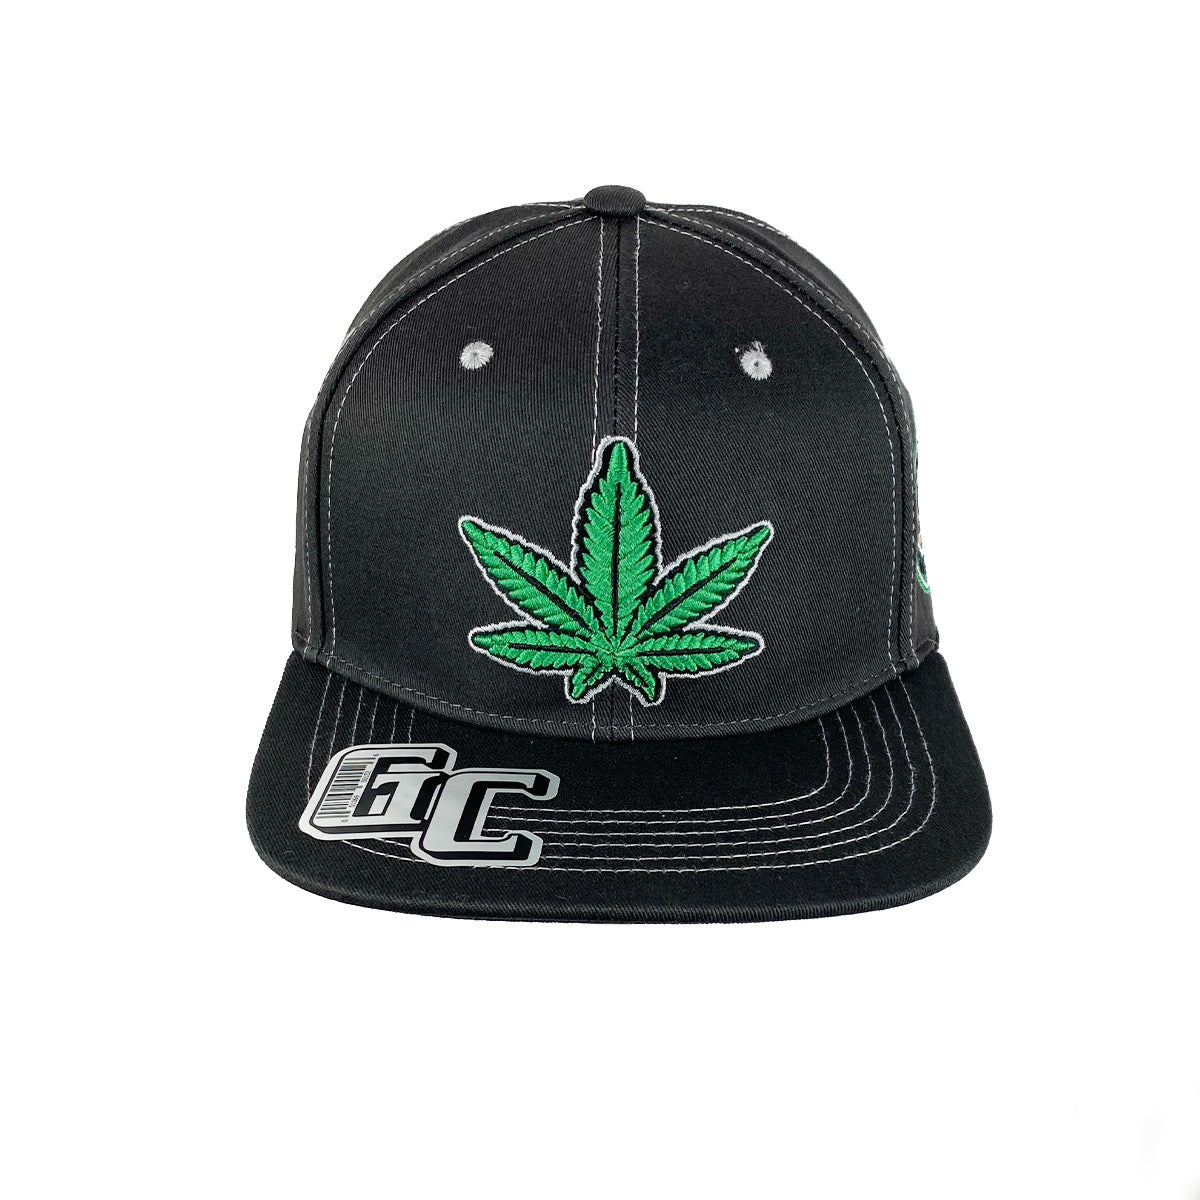 Snapback "All Natural Ingredients" Hat Embroidered